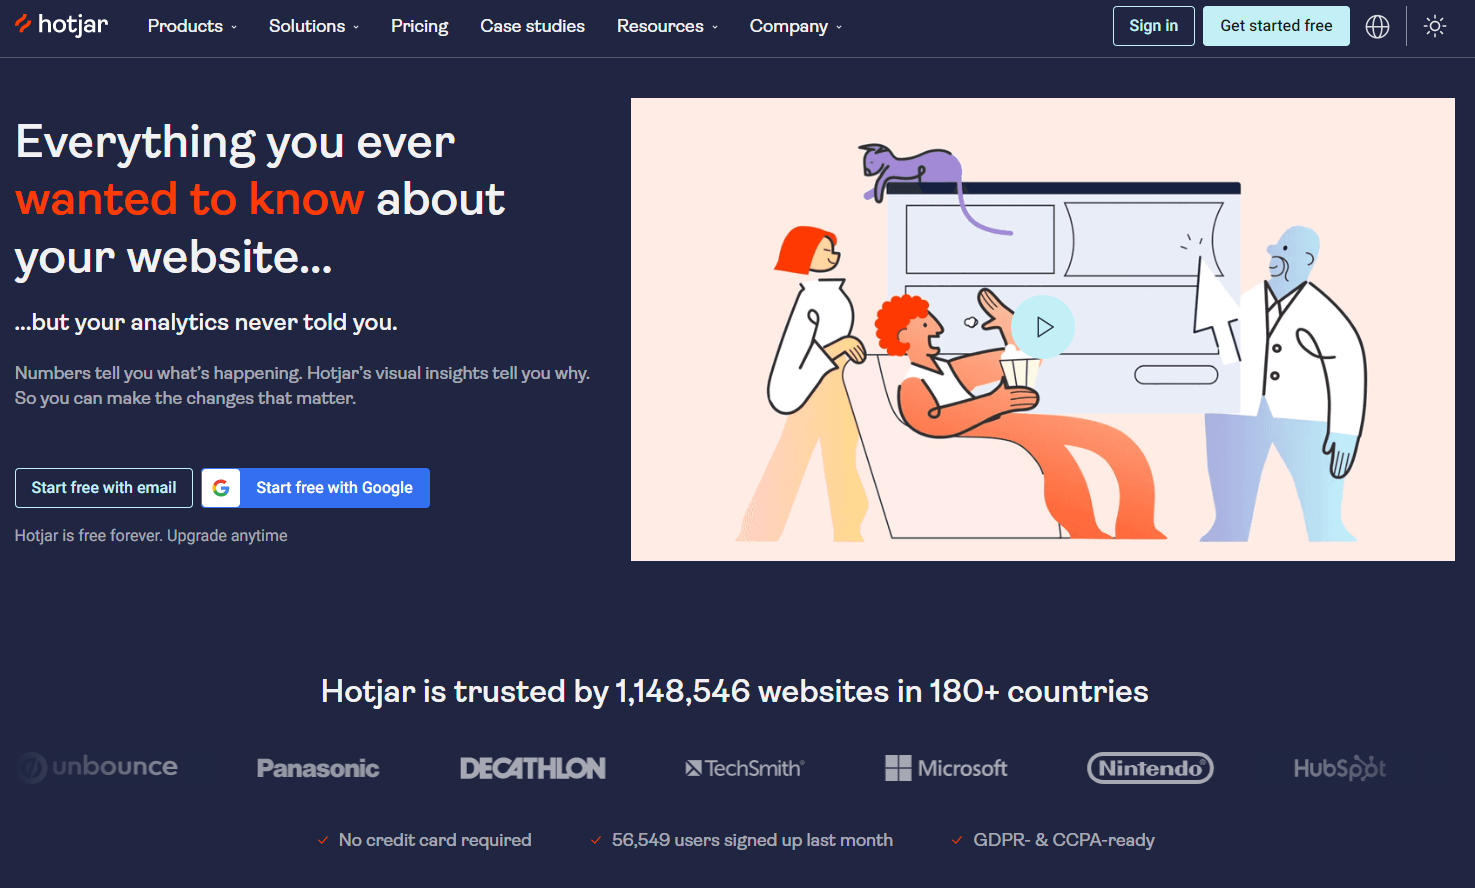 The image is of the Hotjar homepage, a CSAT tool for measuring customer satisfaction. 